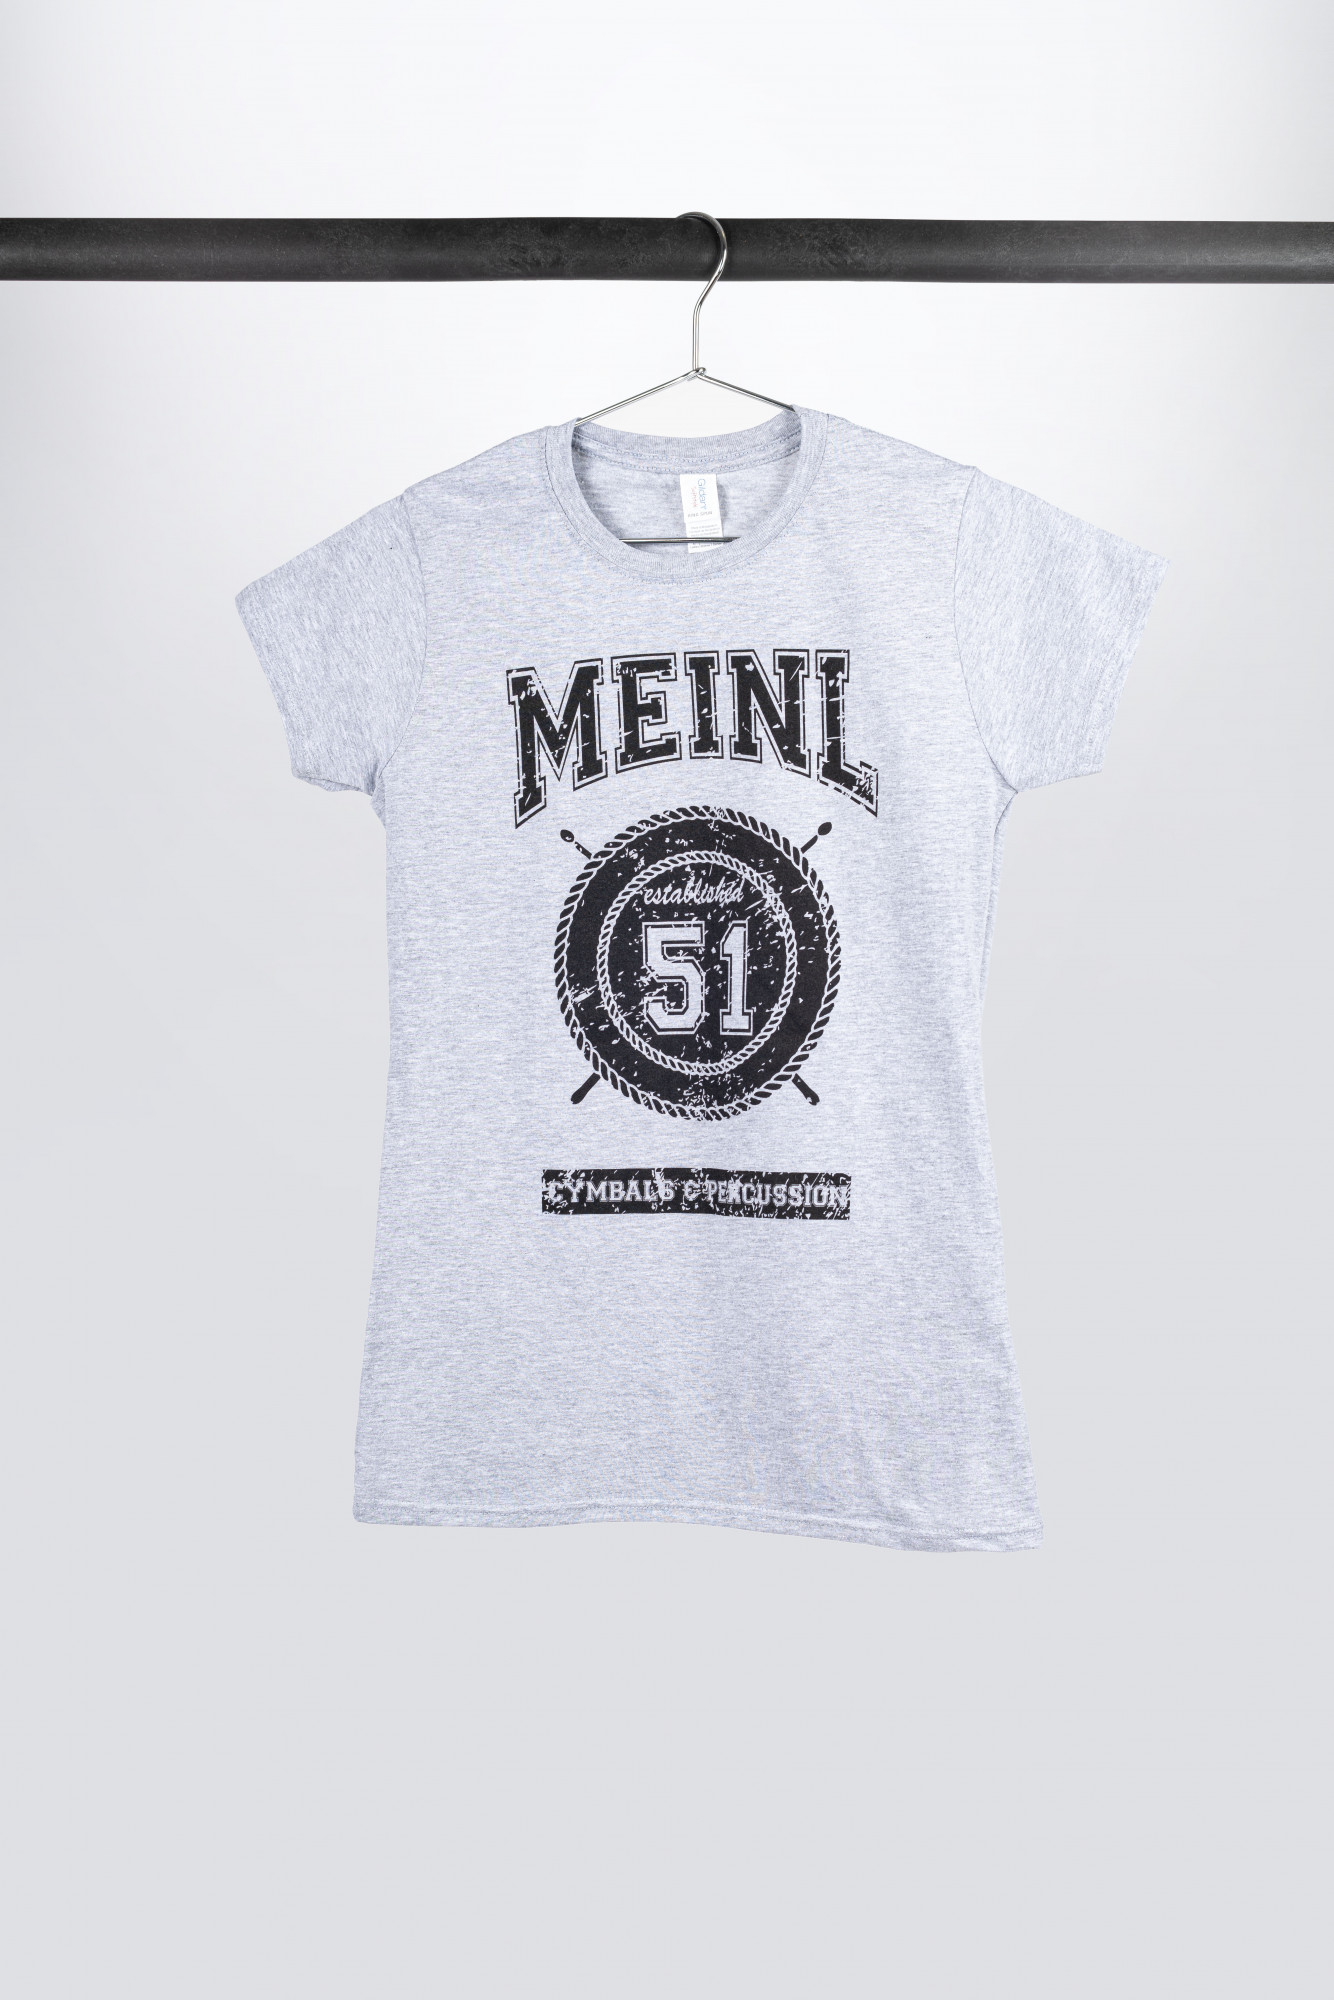 details reaction carve Gray Meinl Girlie T-shirt with imprinted black college logo on chest (M41)  | T-Shirts Girlie | Merchandise | Meinl Cymbals | MEINL Shop